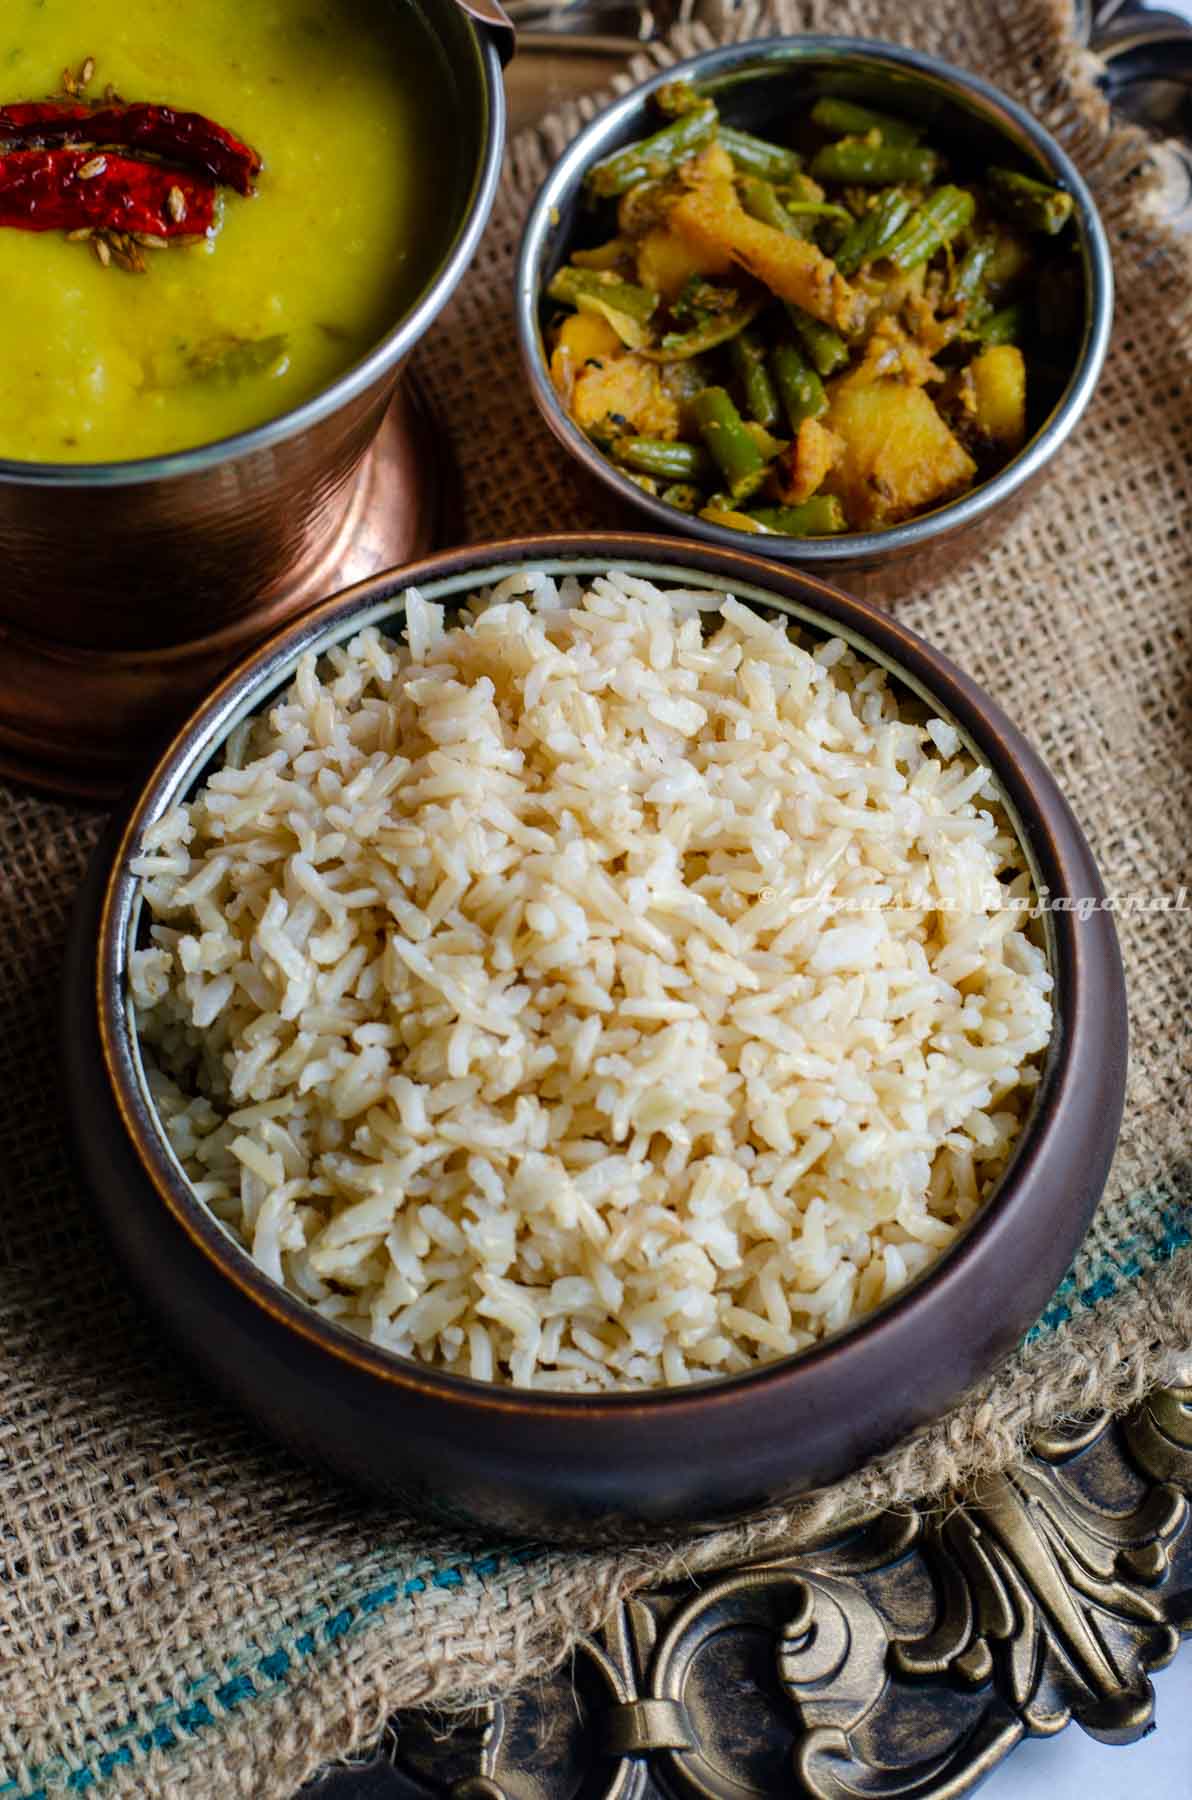 A bowl of brown basmati rice, some toor dal and a beans potato vegetable curry presented together.